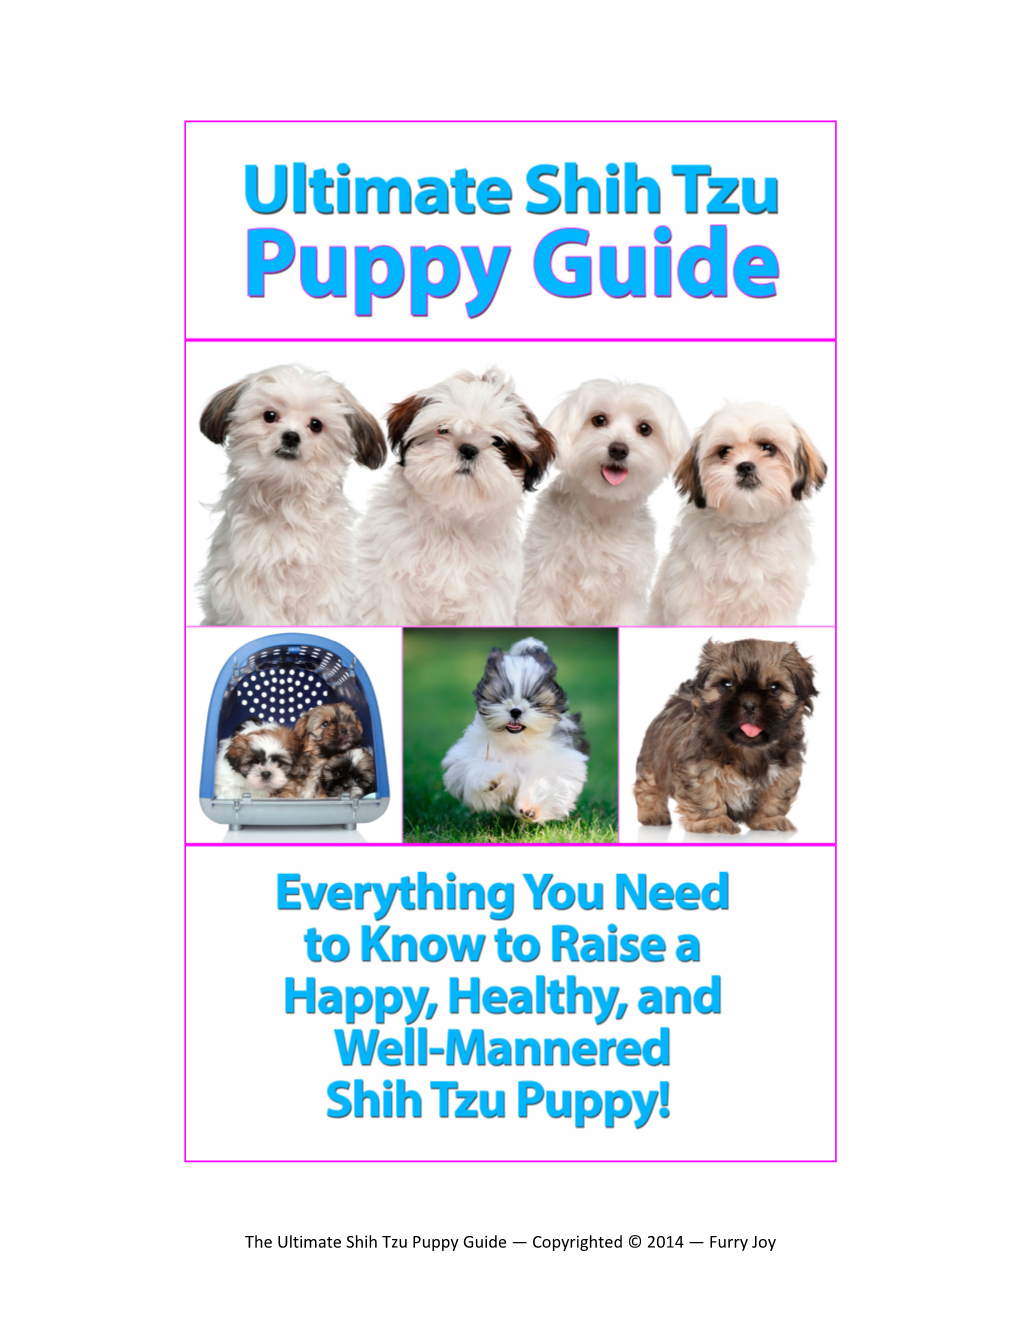 The Ultimate Shih Tzu Puppy Guide — Copyrighted © 2014 — Furry Joy 2